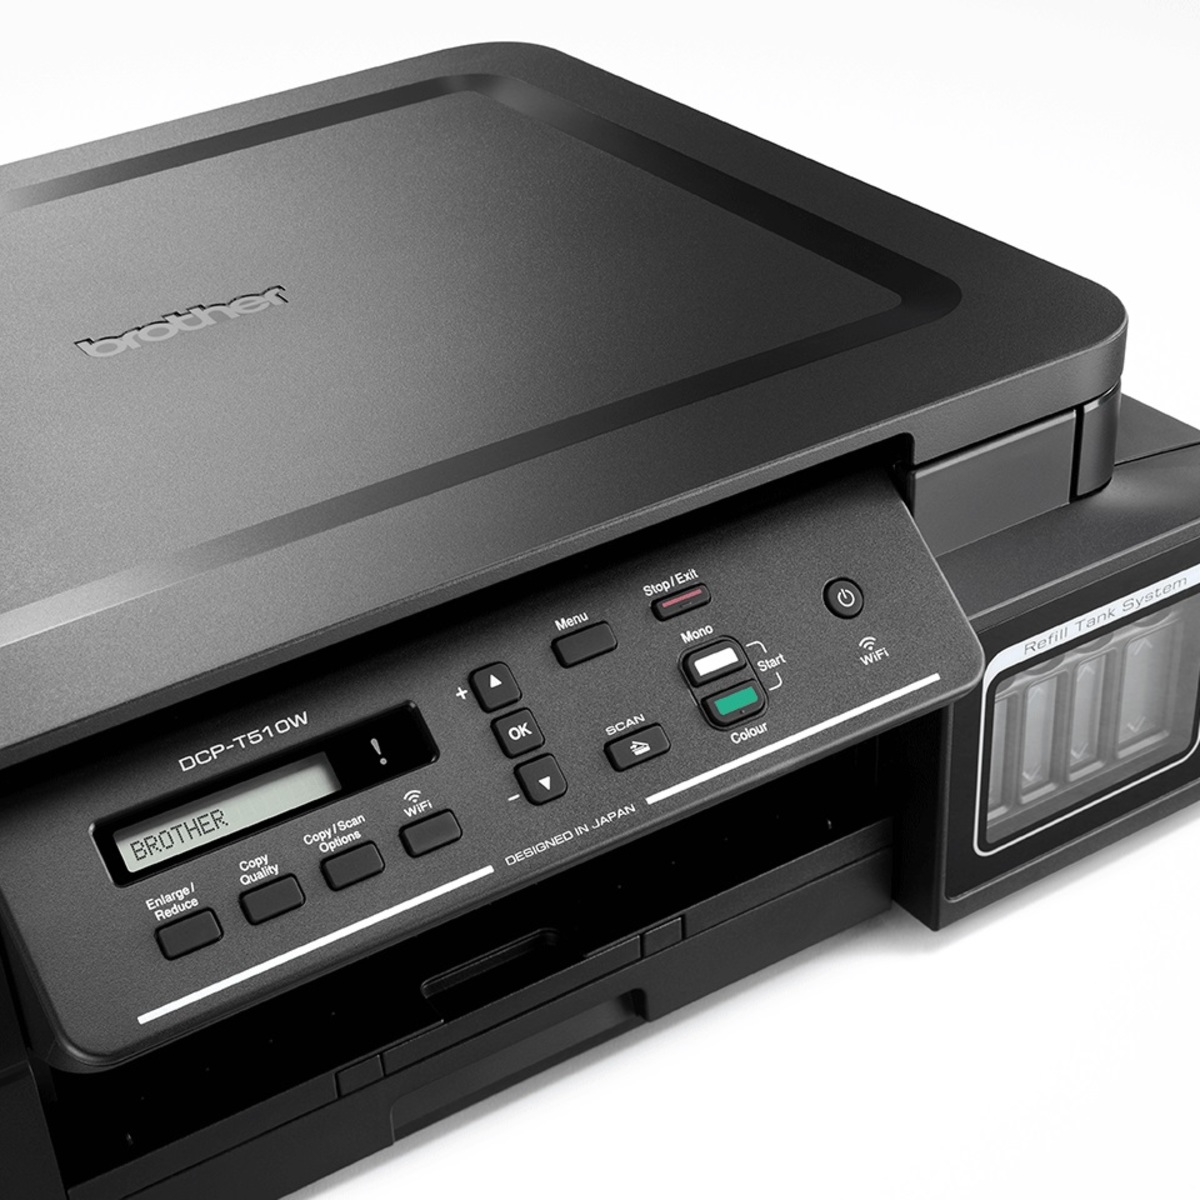 Бротхер принтер dcp. Brother DCP-t310. Brother DCP-t510w. МФУ brother DCP-t310. Принтер brother 510w.